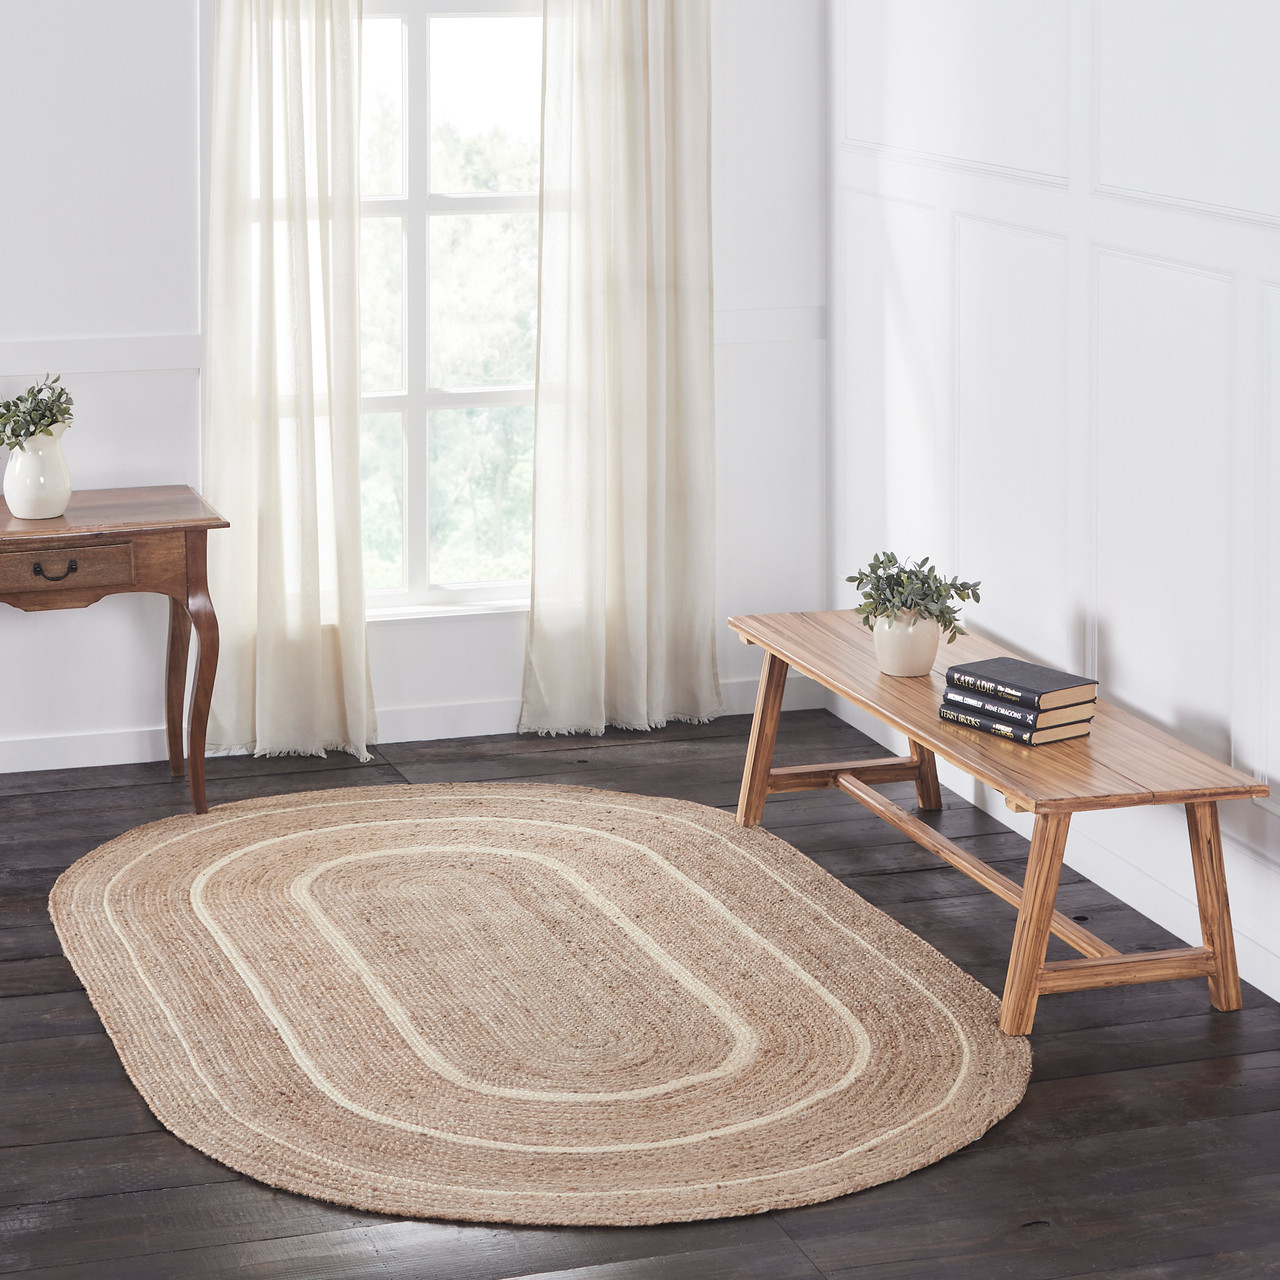 Colonial Star Jute Rug Oval w/ Pad 36x60 by Mayflower Market - VHC Brands